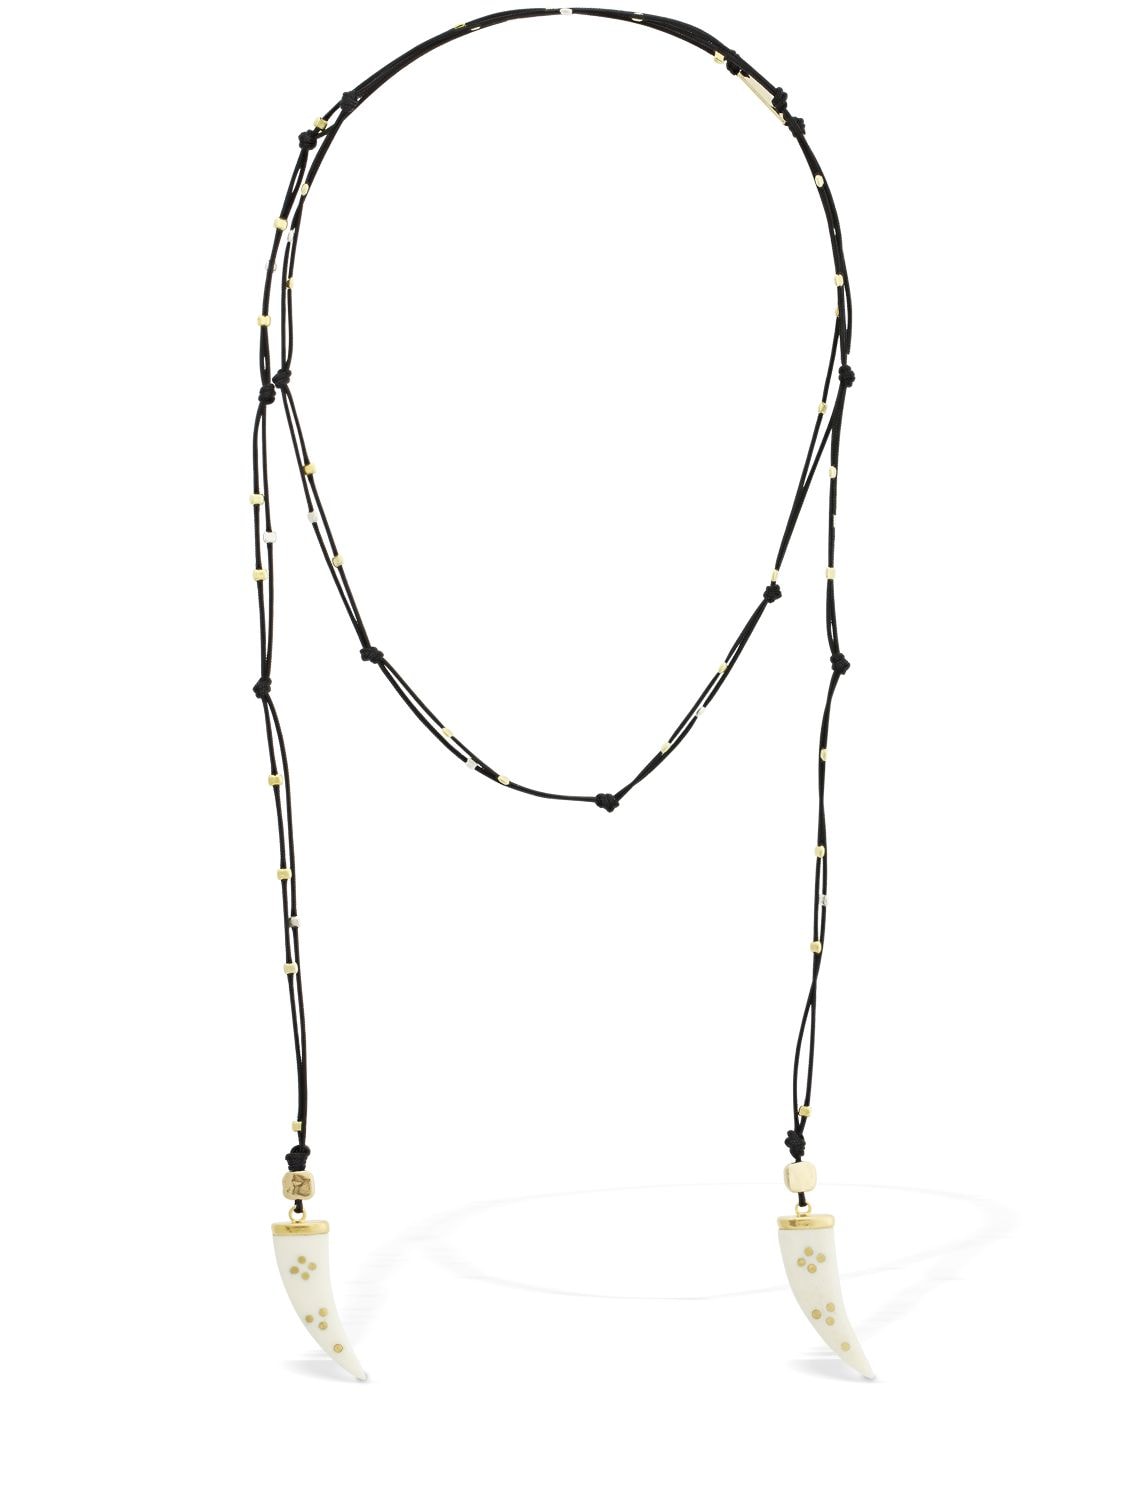 Image of Shiny Aimable Scarf Necklace